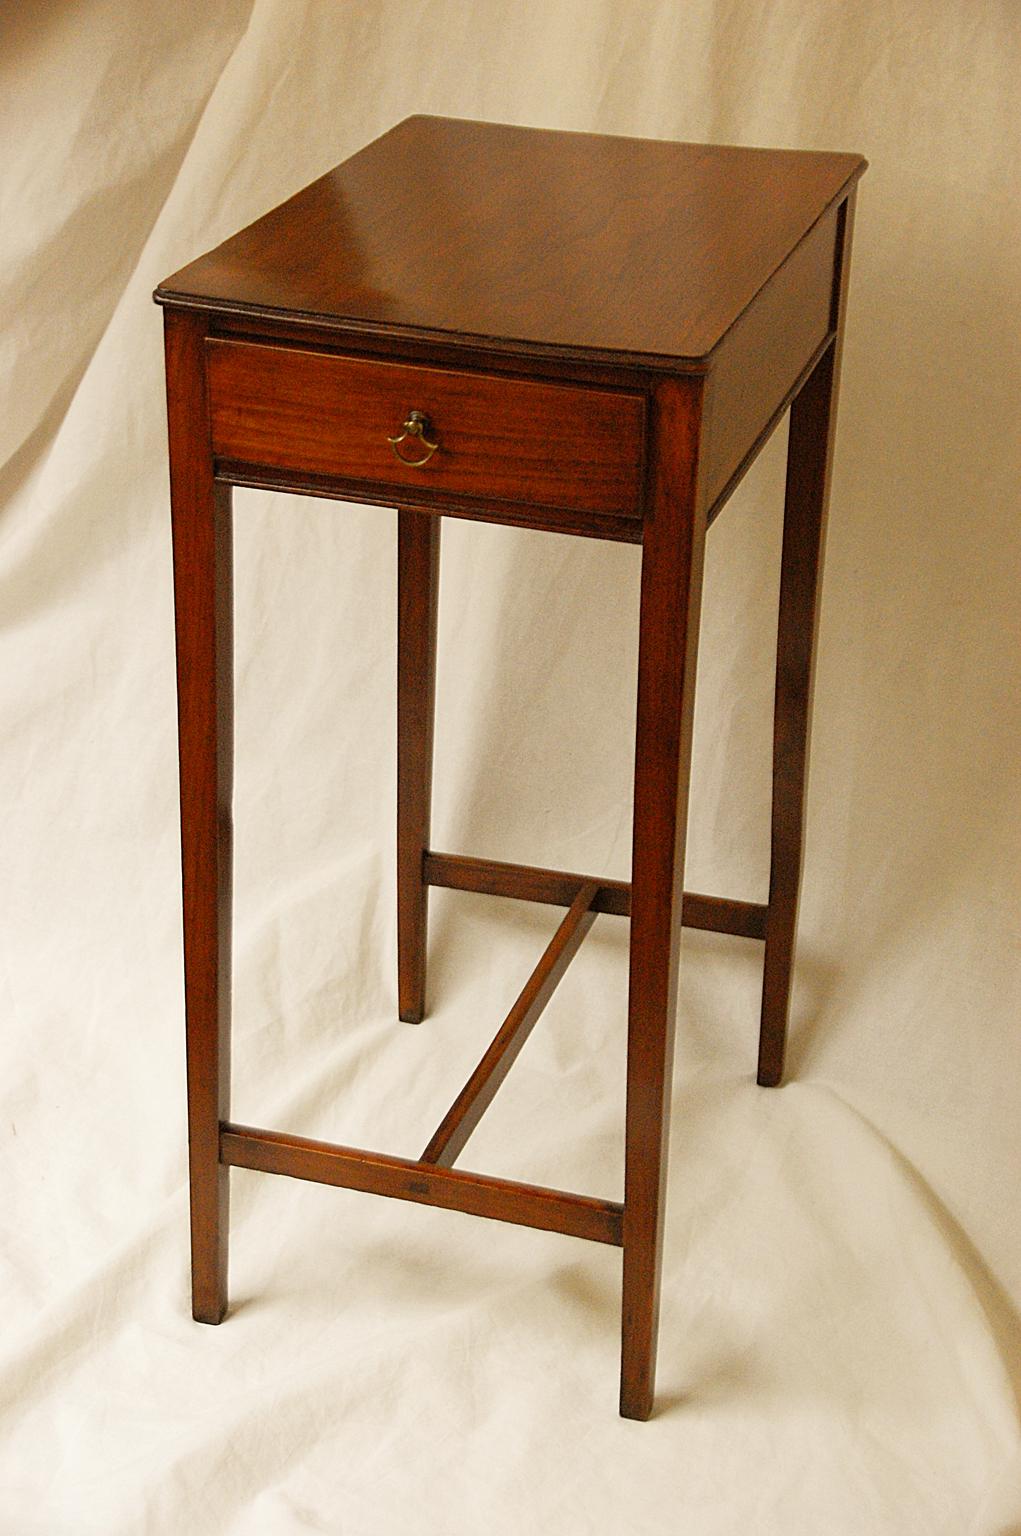 English early 19th century cedar one-drawer side table with tapered legs, H-stretcher, molded edge top. This lovely small simple table is finished on all sides and can free stand easily in any space, circa 1825.